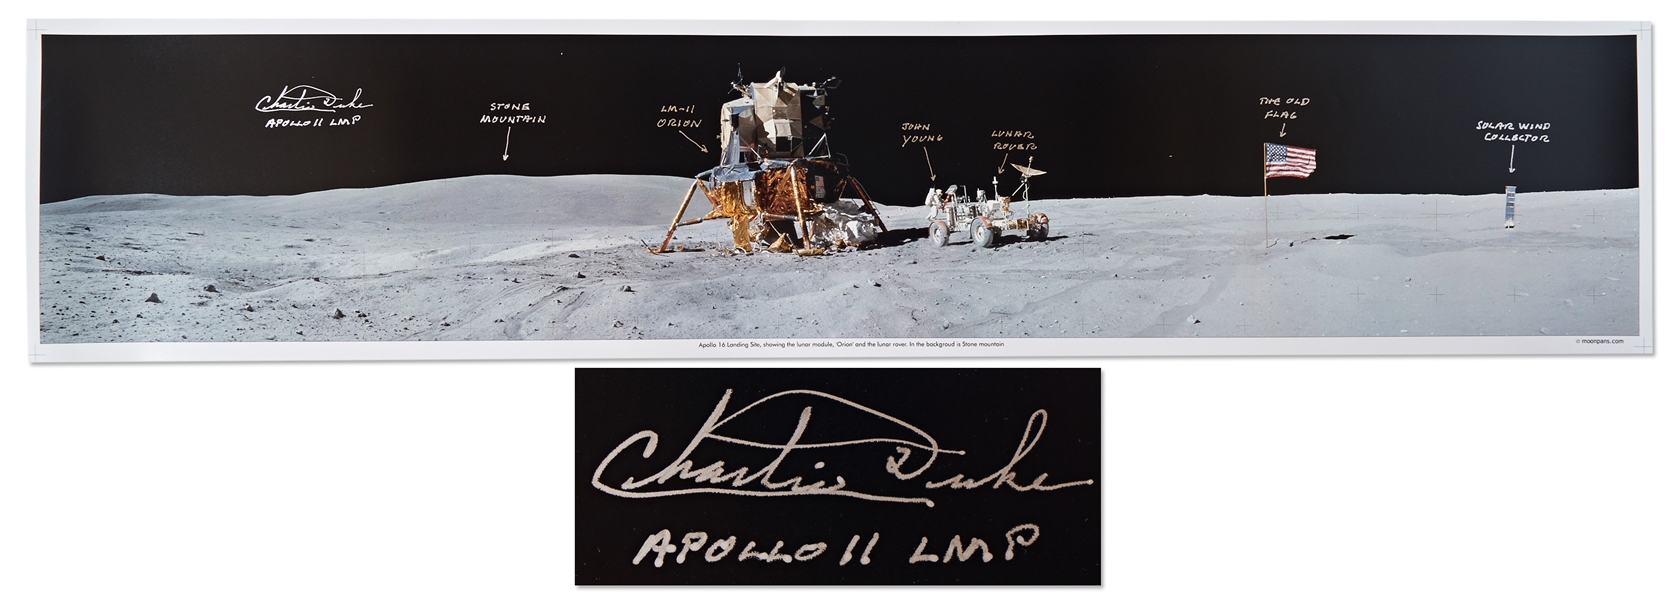 Charlie Duke Signed 40'' x 8'' Panoramic Lunar Photo From the Apollo 16 Mission